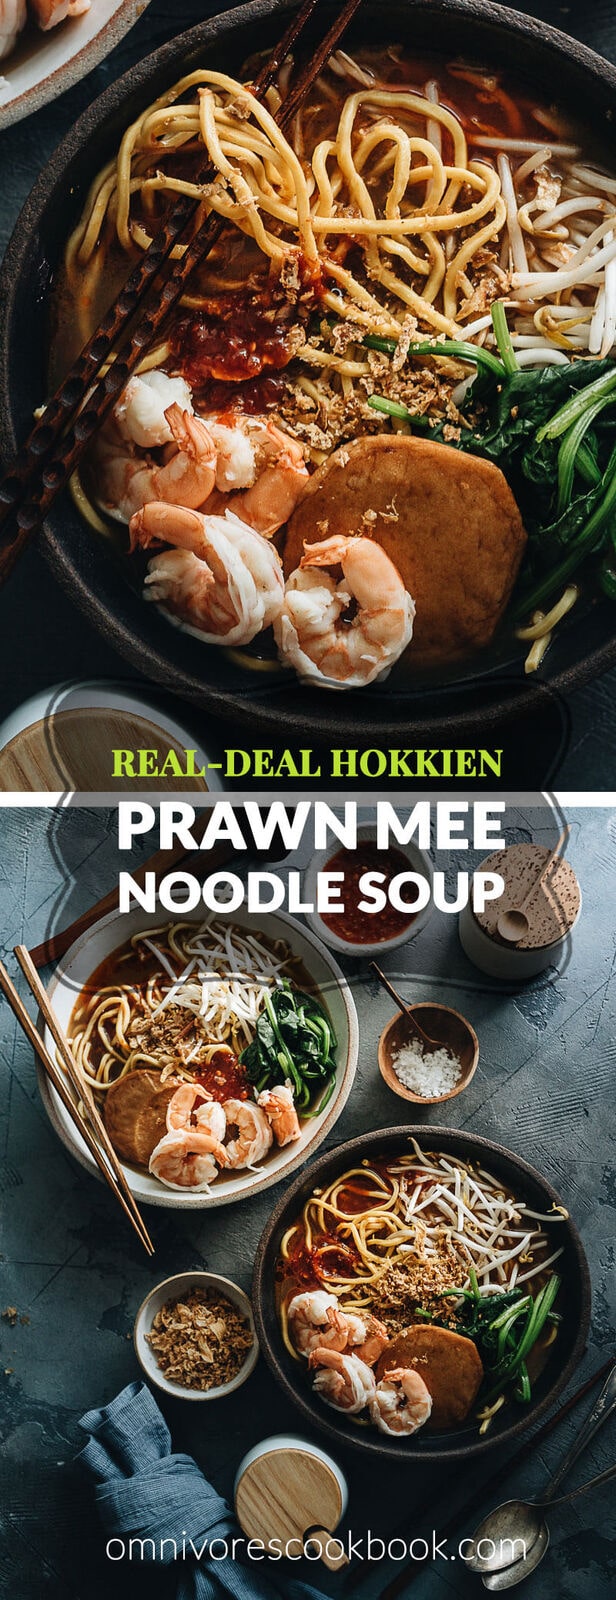 Hokkien Prawn Mee Noodle Soup (Hae Mee) - Tender yellow noodles in a rich savory-sweet red-orange broth served with juicy prawns, fish cakes, crunchy bean sprouts, and crispy fried shallots. {Gluten-Free adaptable}